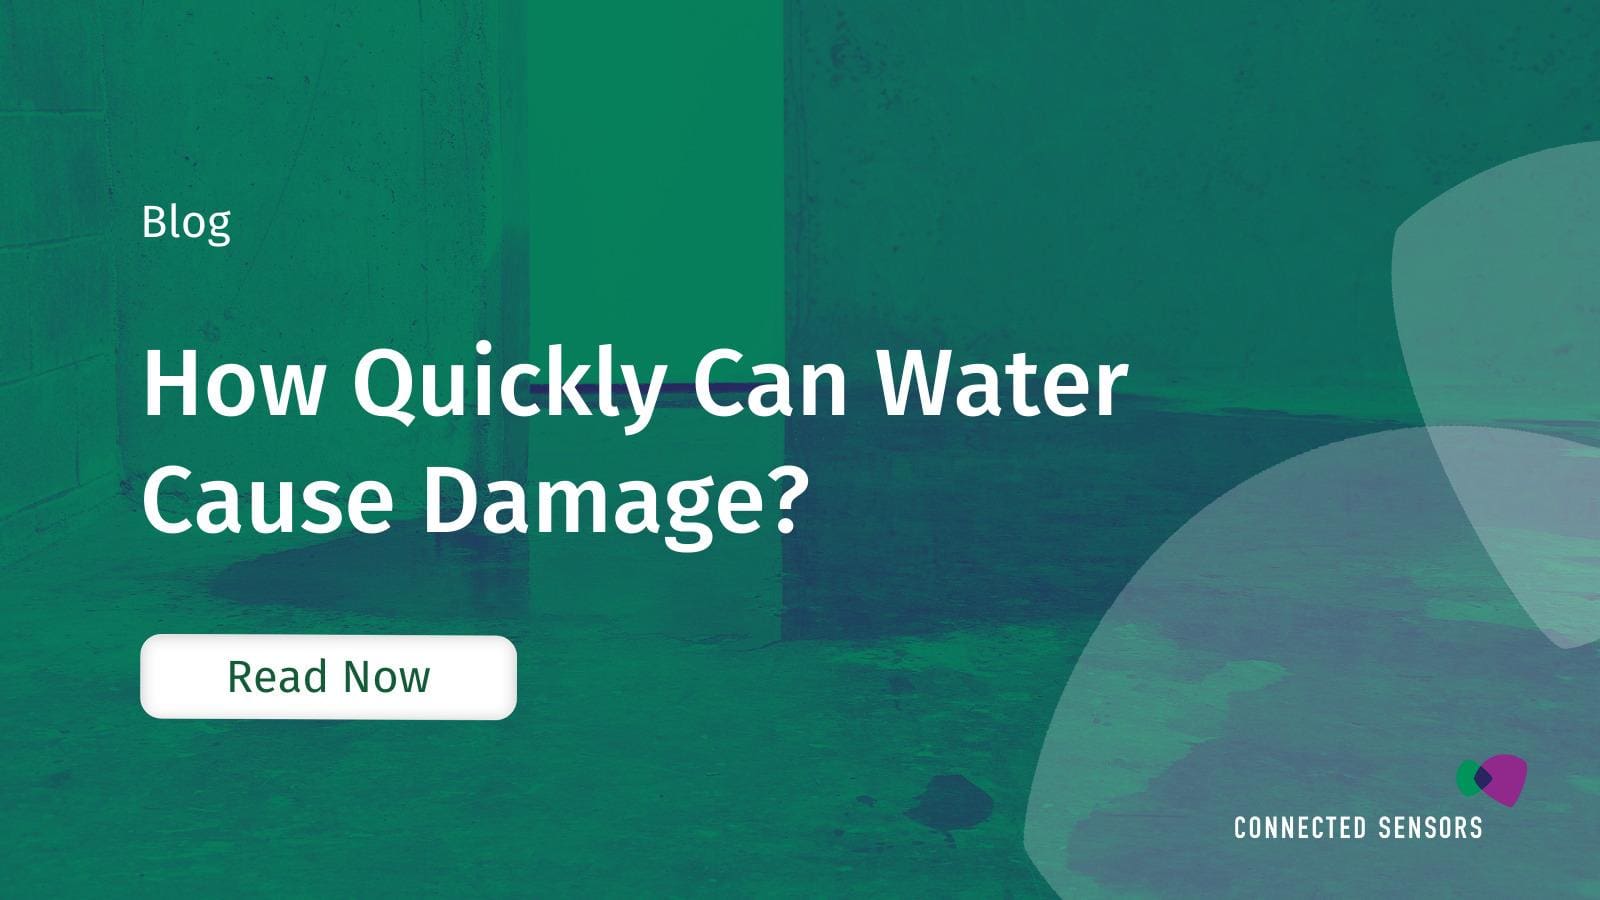 How Quickly Can Water Cause Damage?